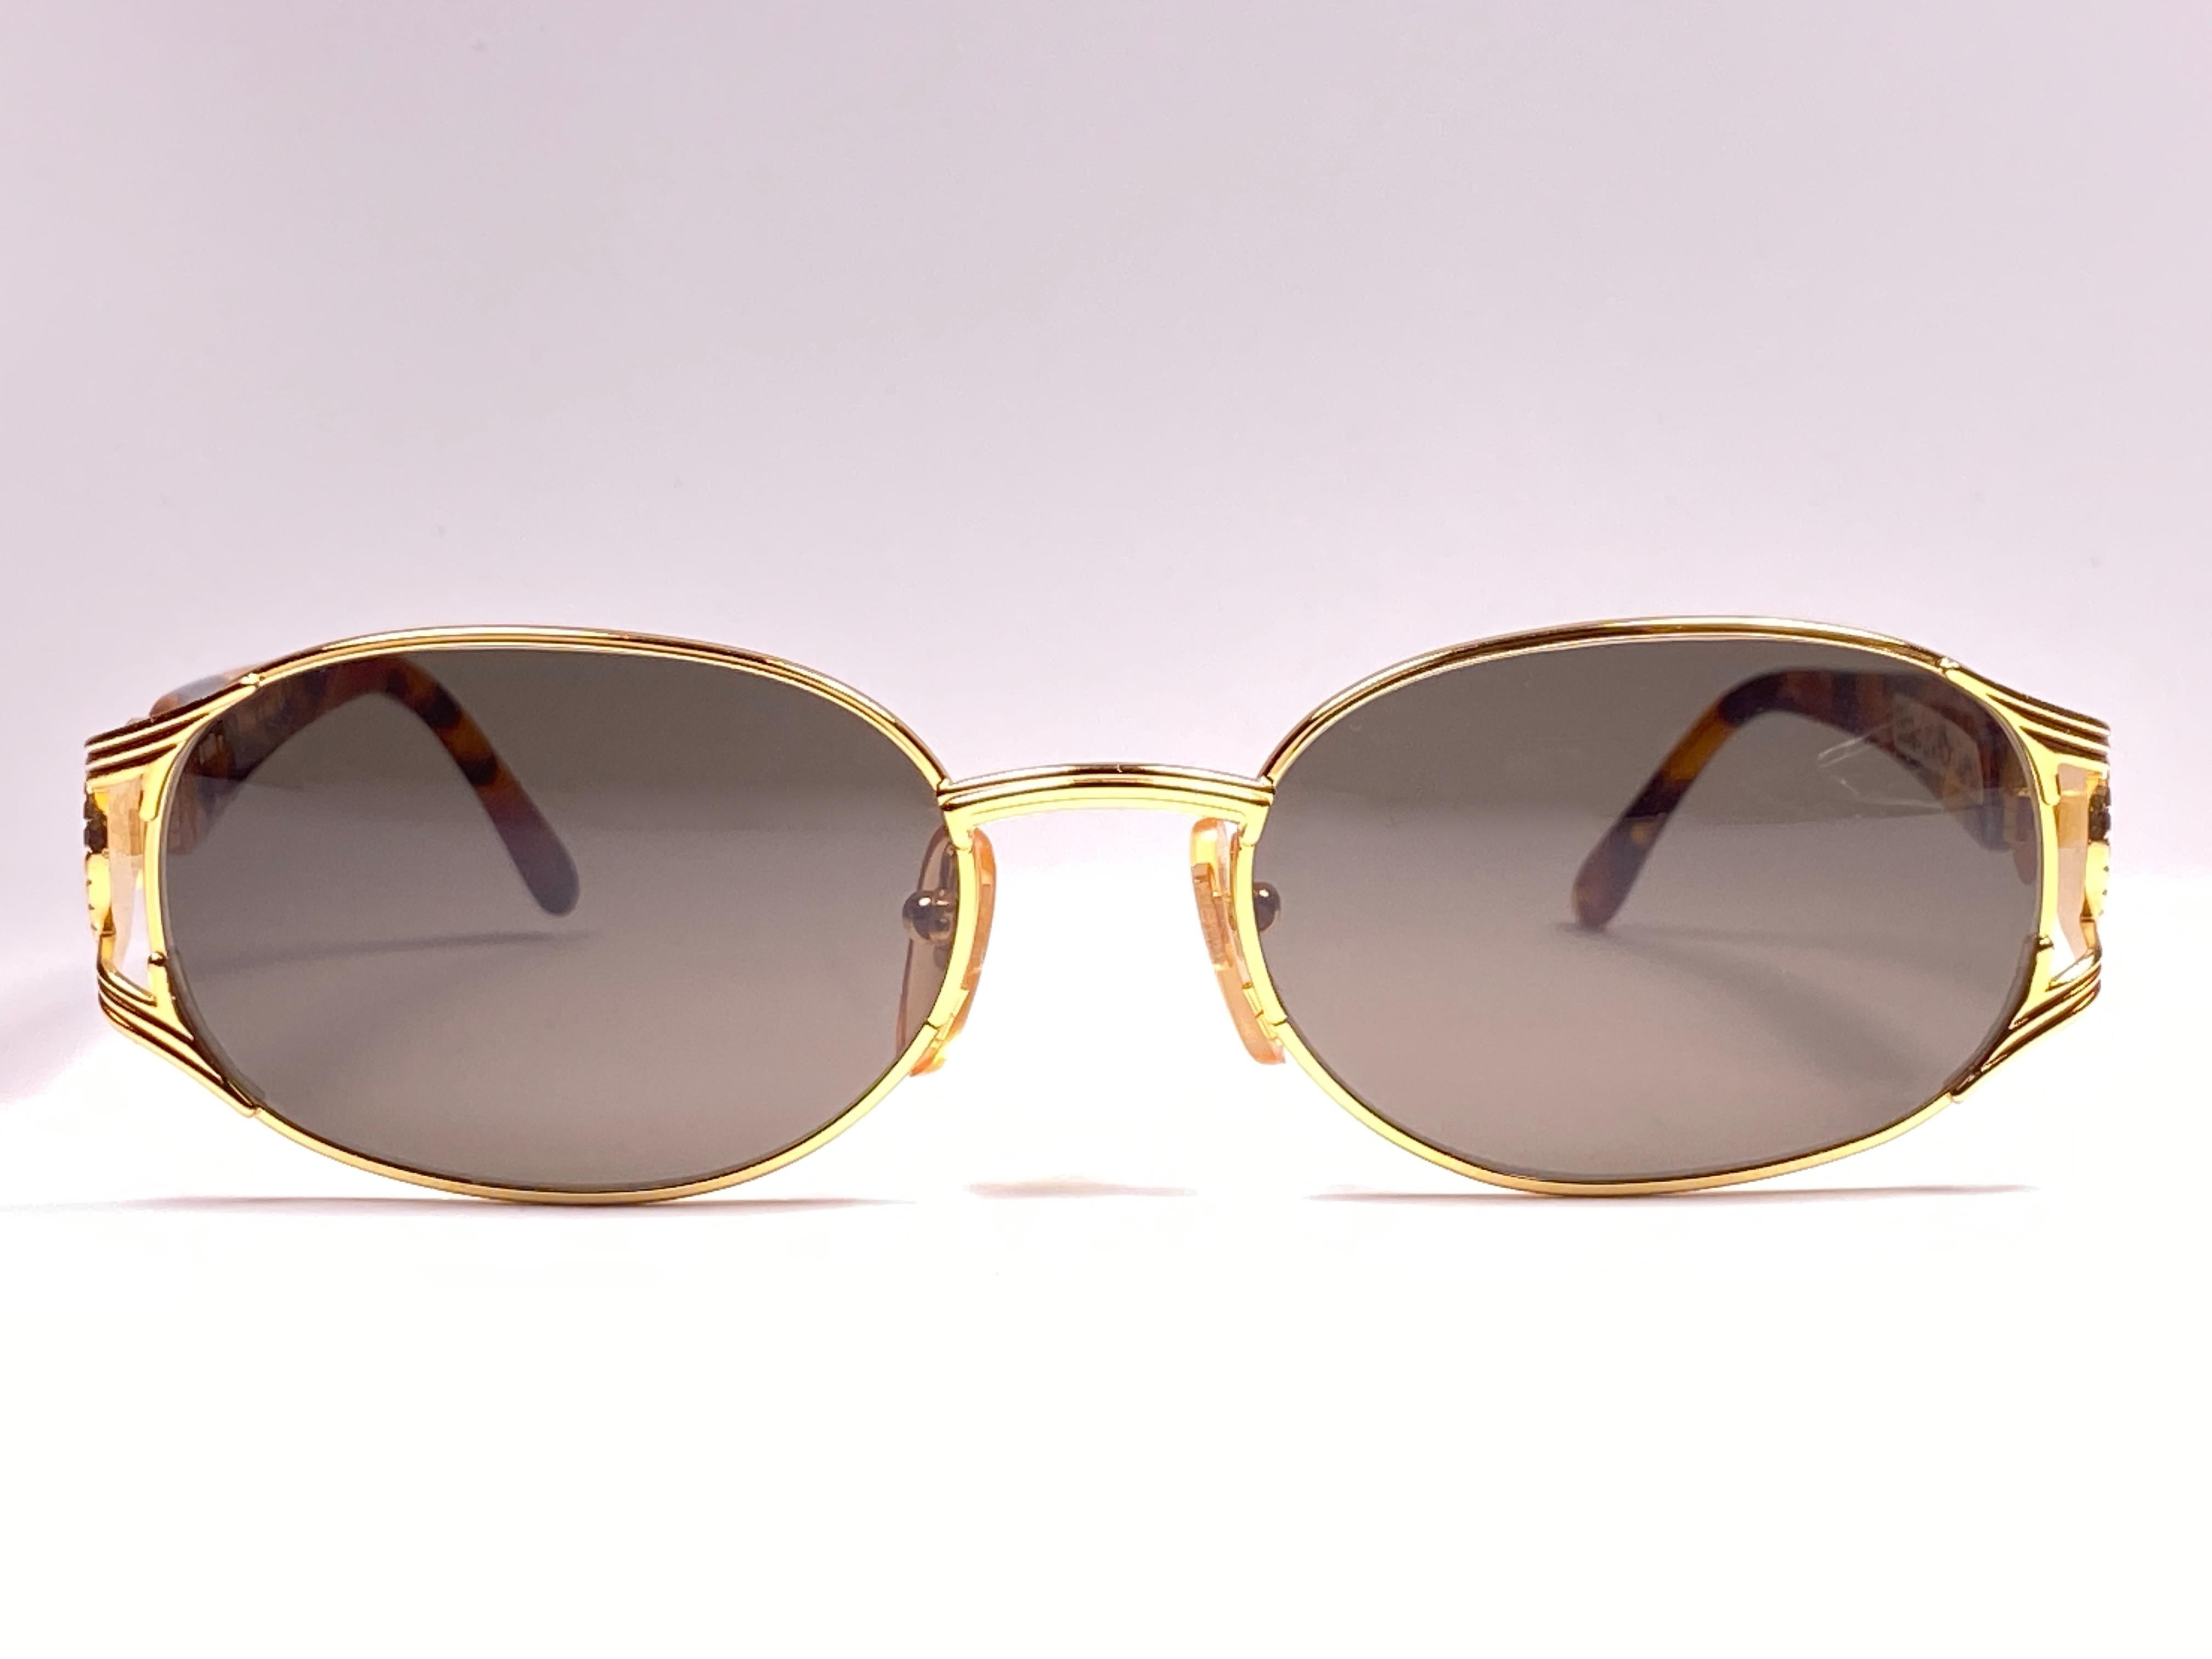 New Fendi oval gold & black oval frame with solid grey ( UV protection ) lenses.

Made in Italy.
 
Produced and design in 1990's.

New, never worn or displayed. this  item may show minor sign of wear due to storage.